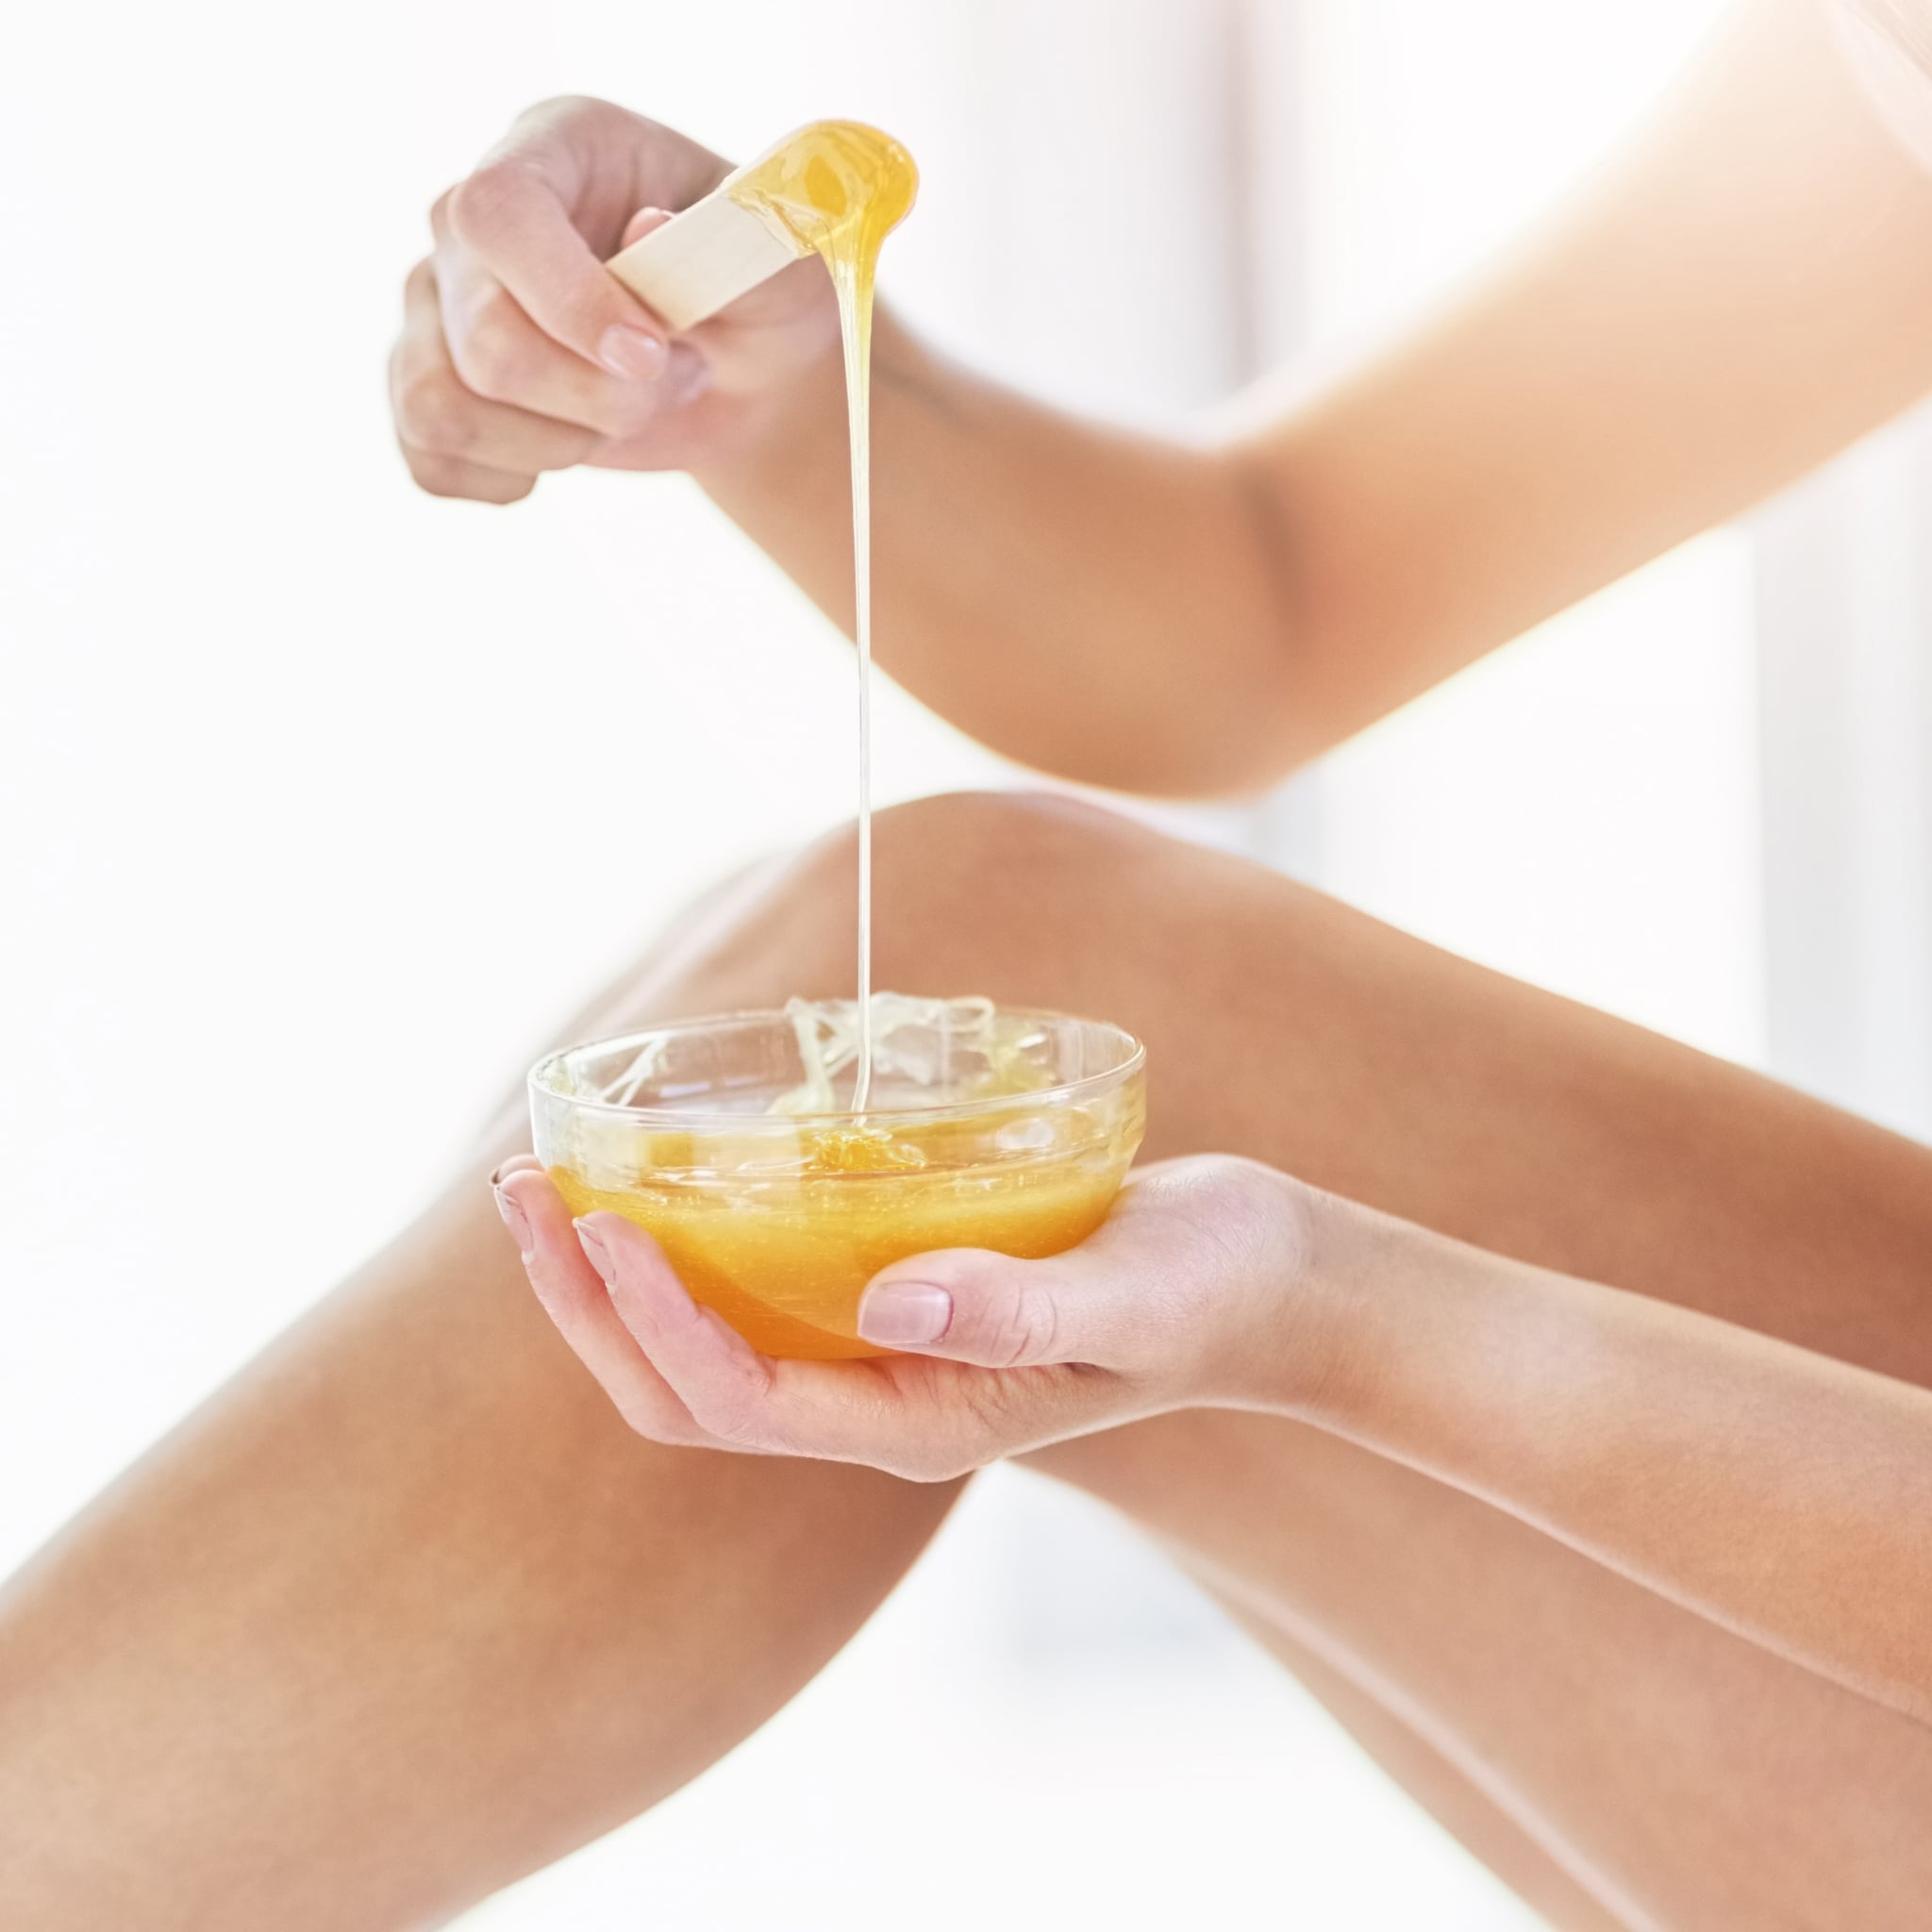 Hair Removal Maintenance In Between Waxing Appointment | POPSUGAR Beauty